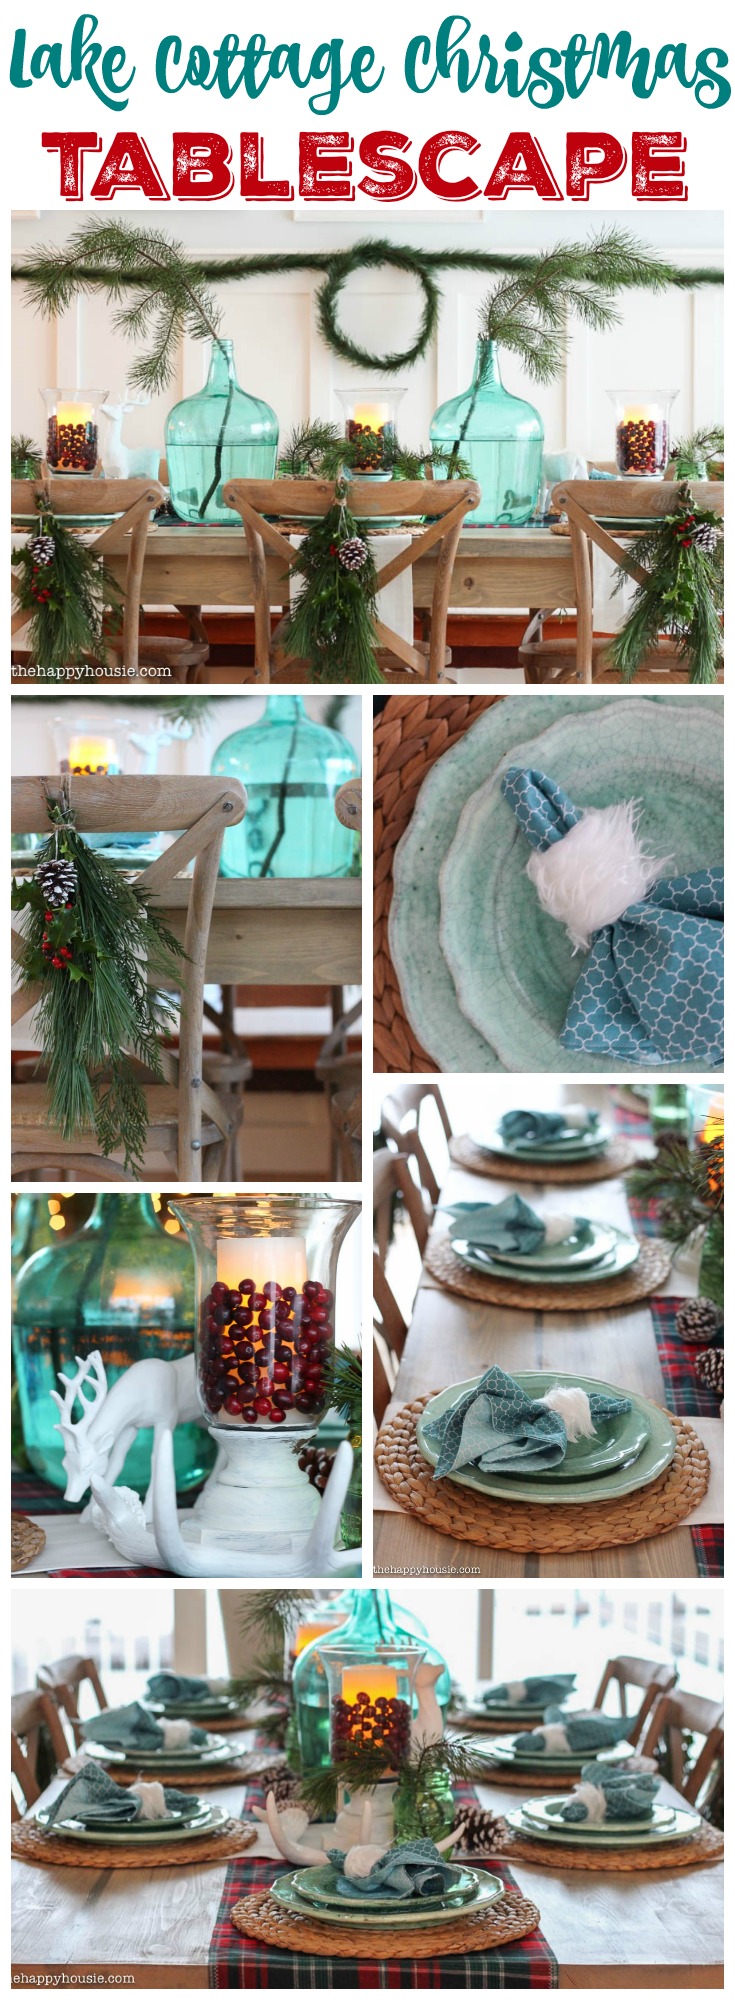 Beautiful Holiday Inspiration at this Lake Cottage Christmas Tablescape inspiration graphic.